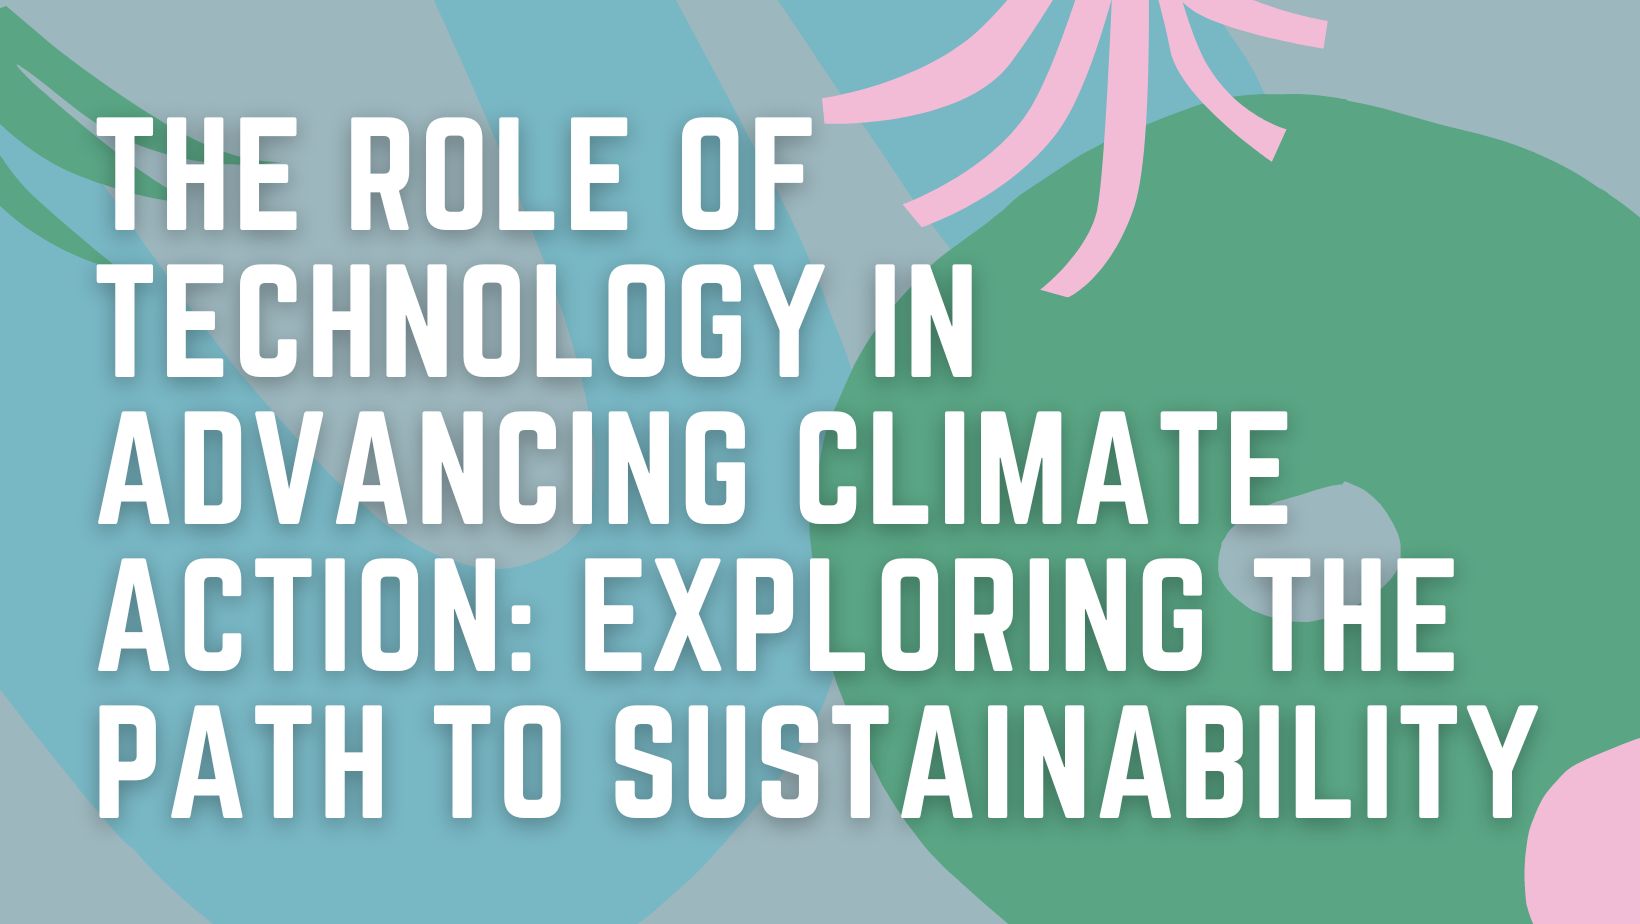 The Role of Technology in Advancing Climate Action: Exploring the Path to Sustainability